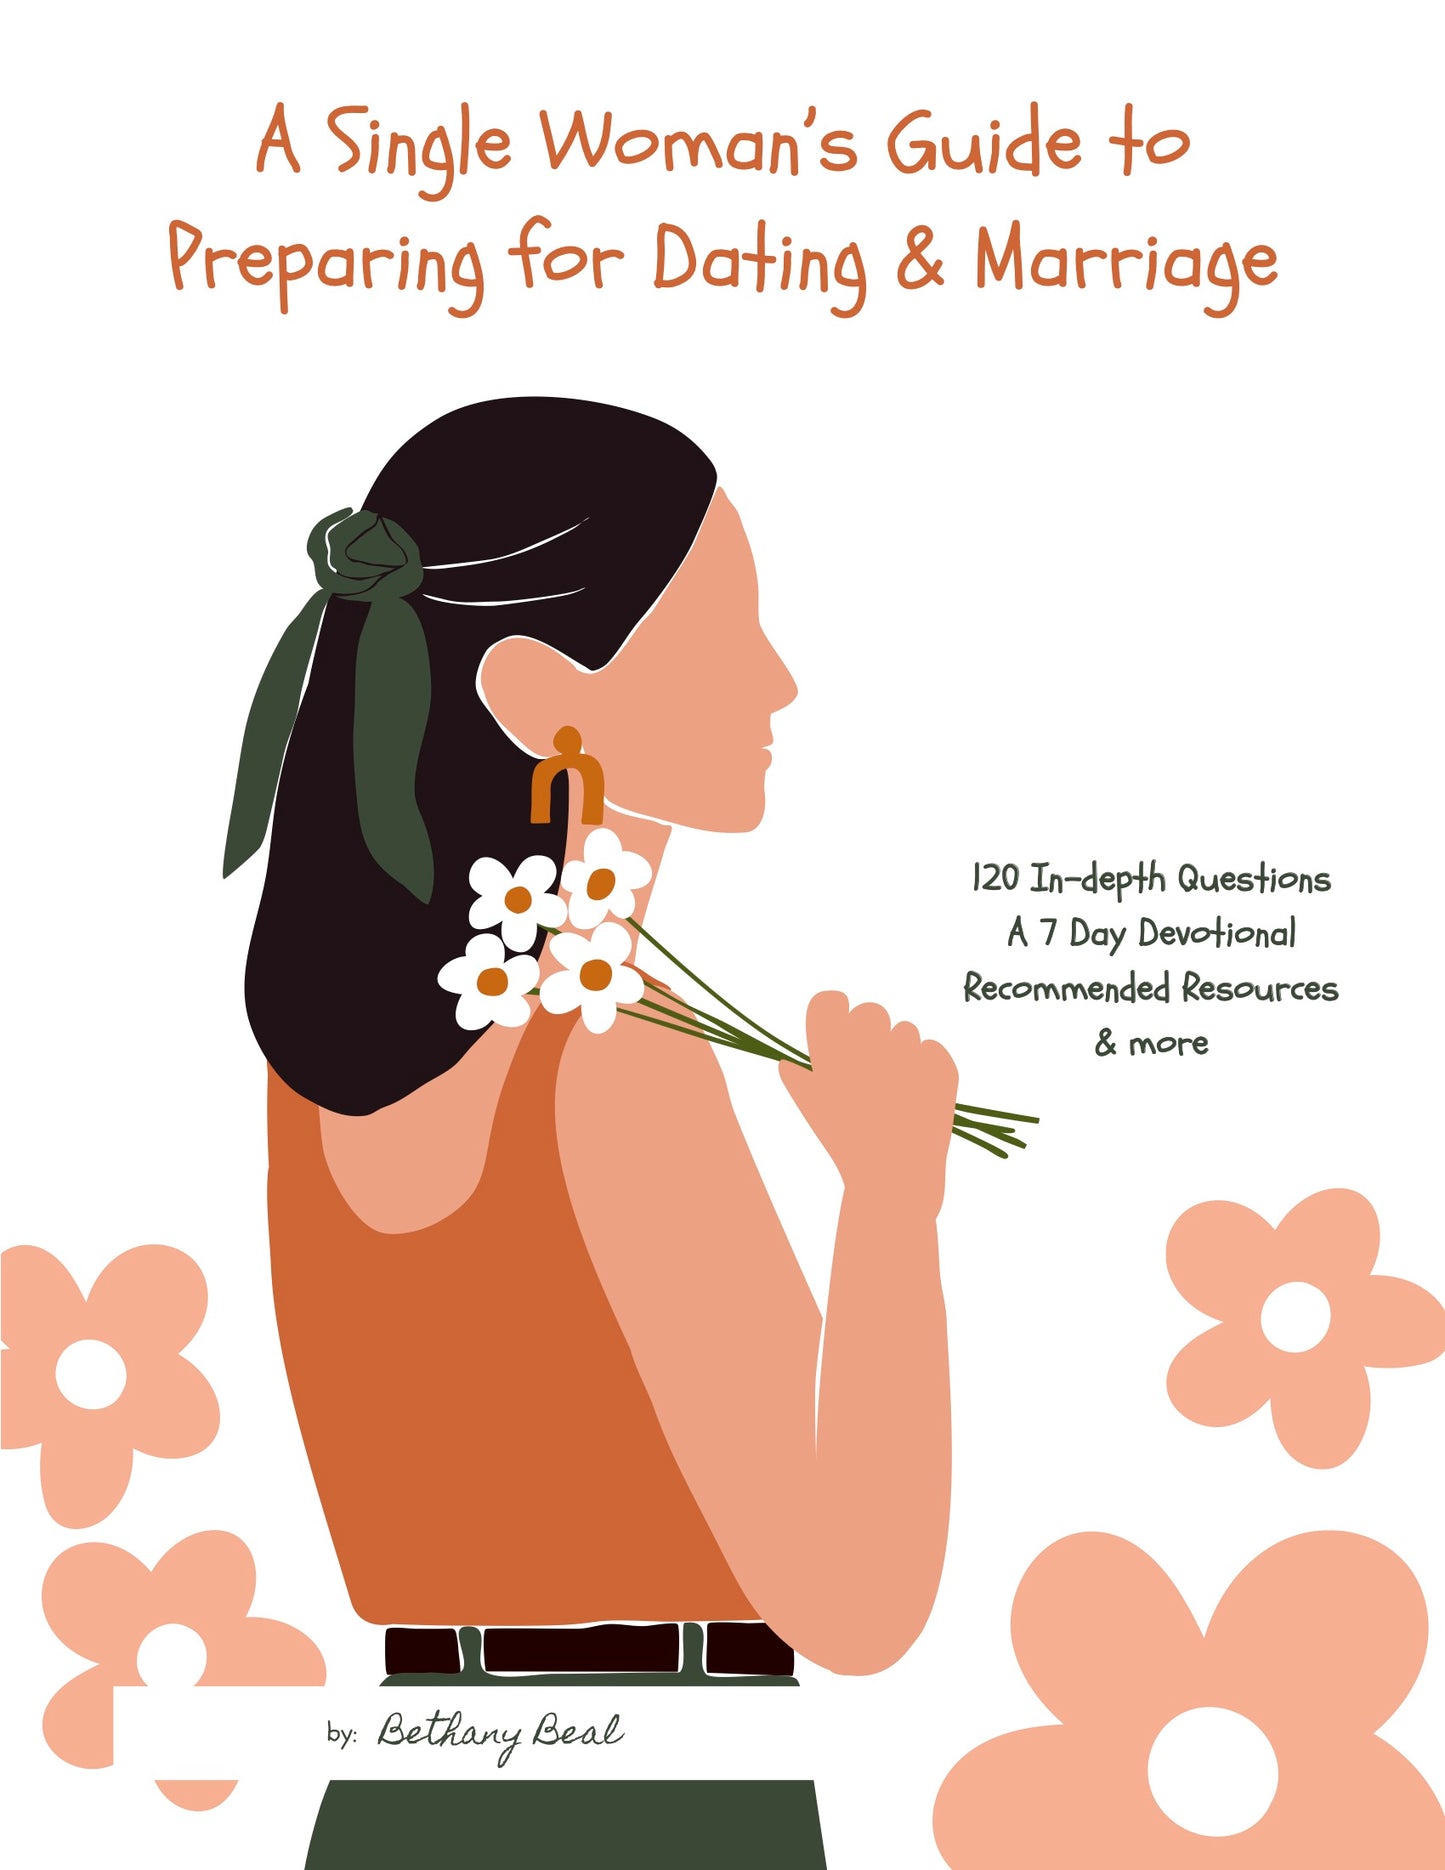 A Single Woman's Guide to Preparing for Dating & Marriage (PDF Download)